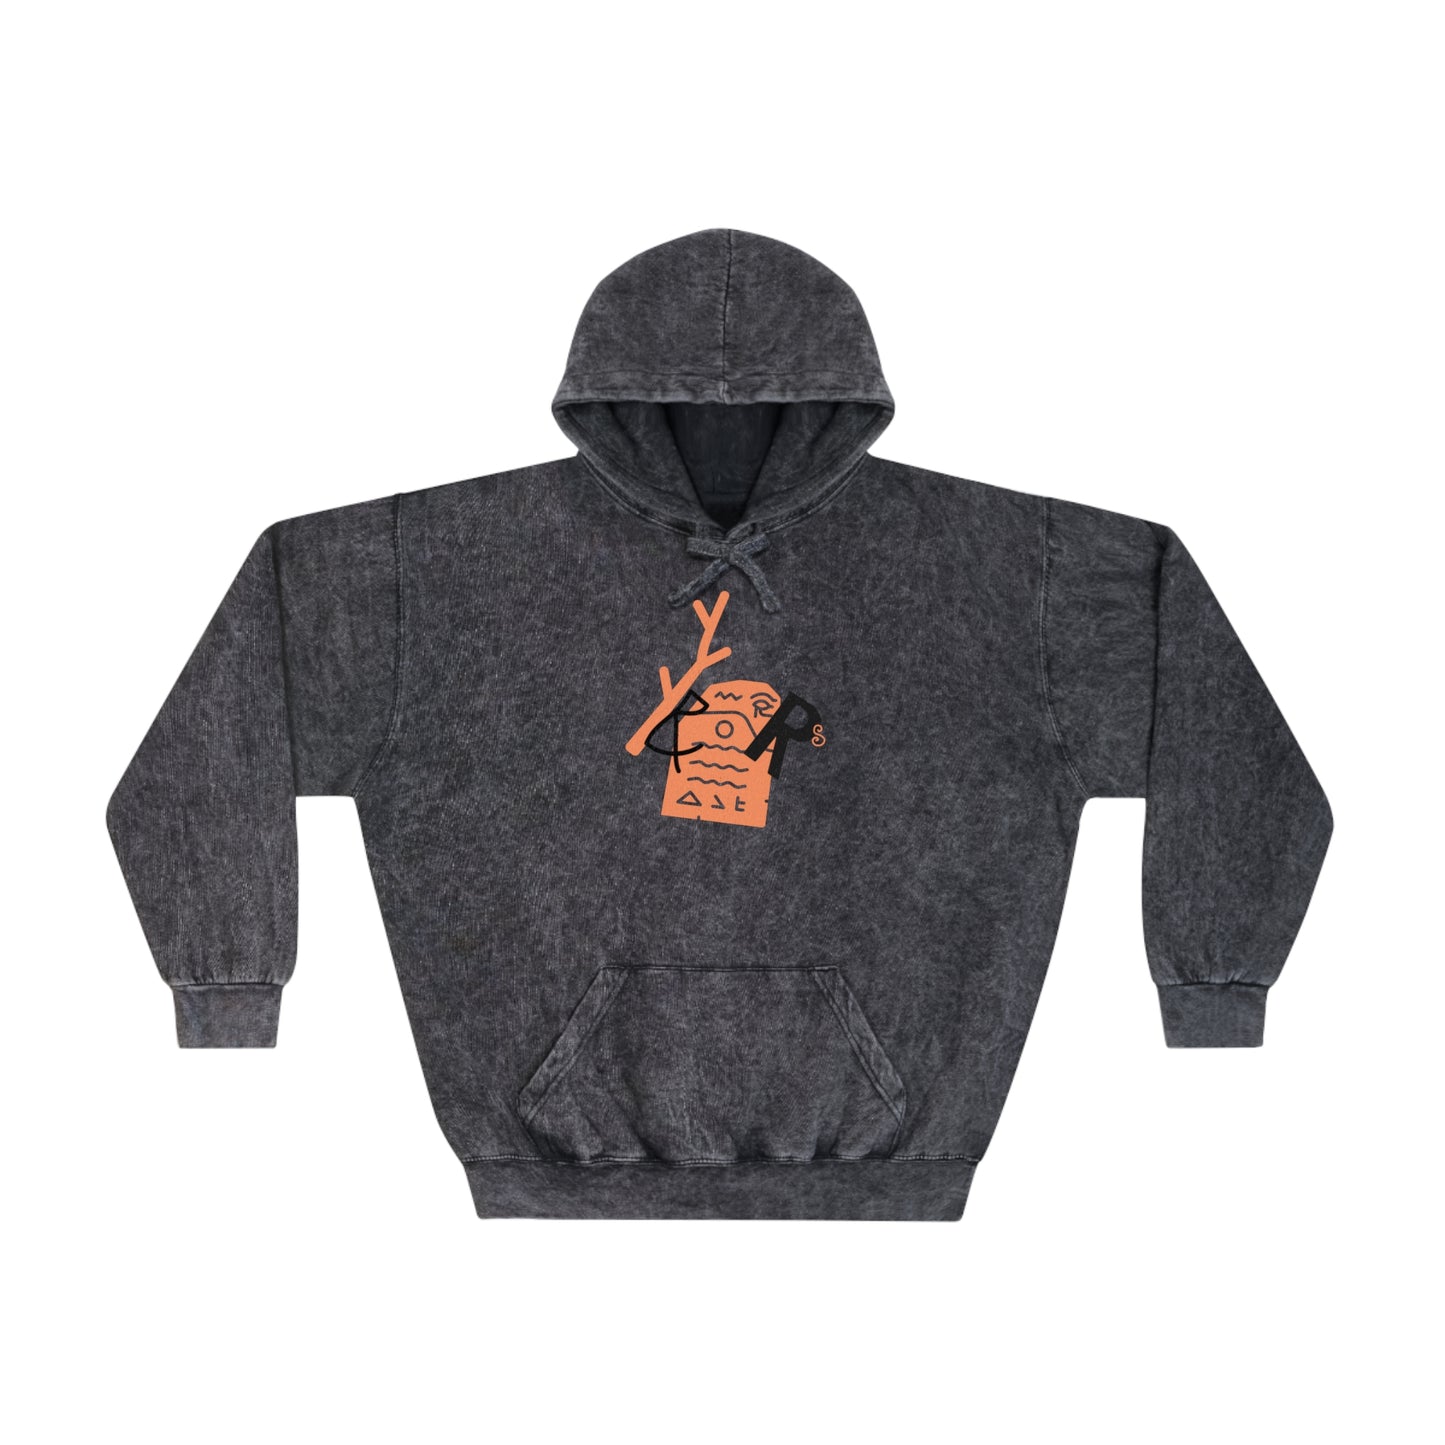 Unisex "Stix & Stonerz" Mineral Wash Hoodie (The | In-House | Collection)